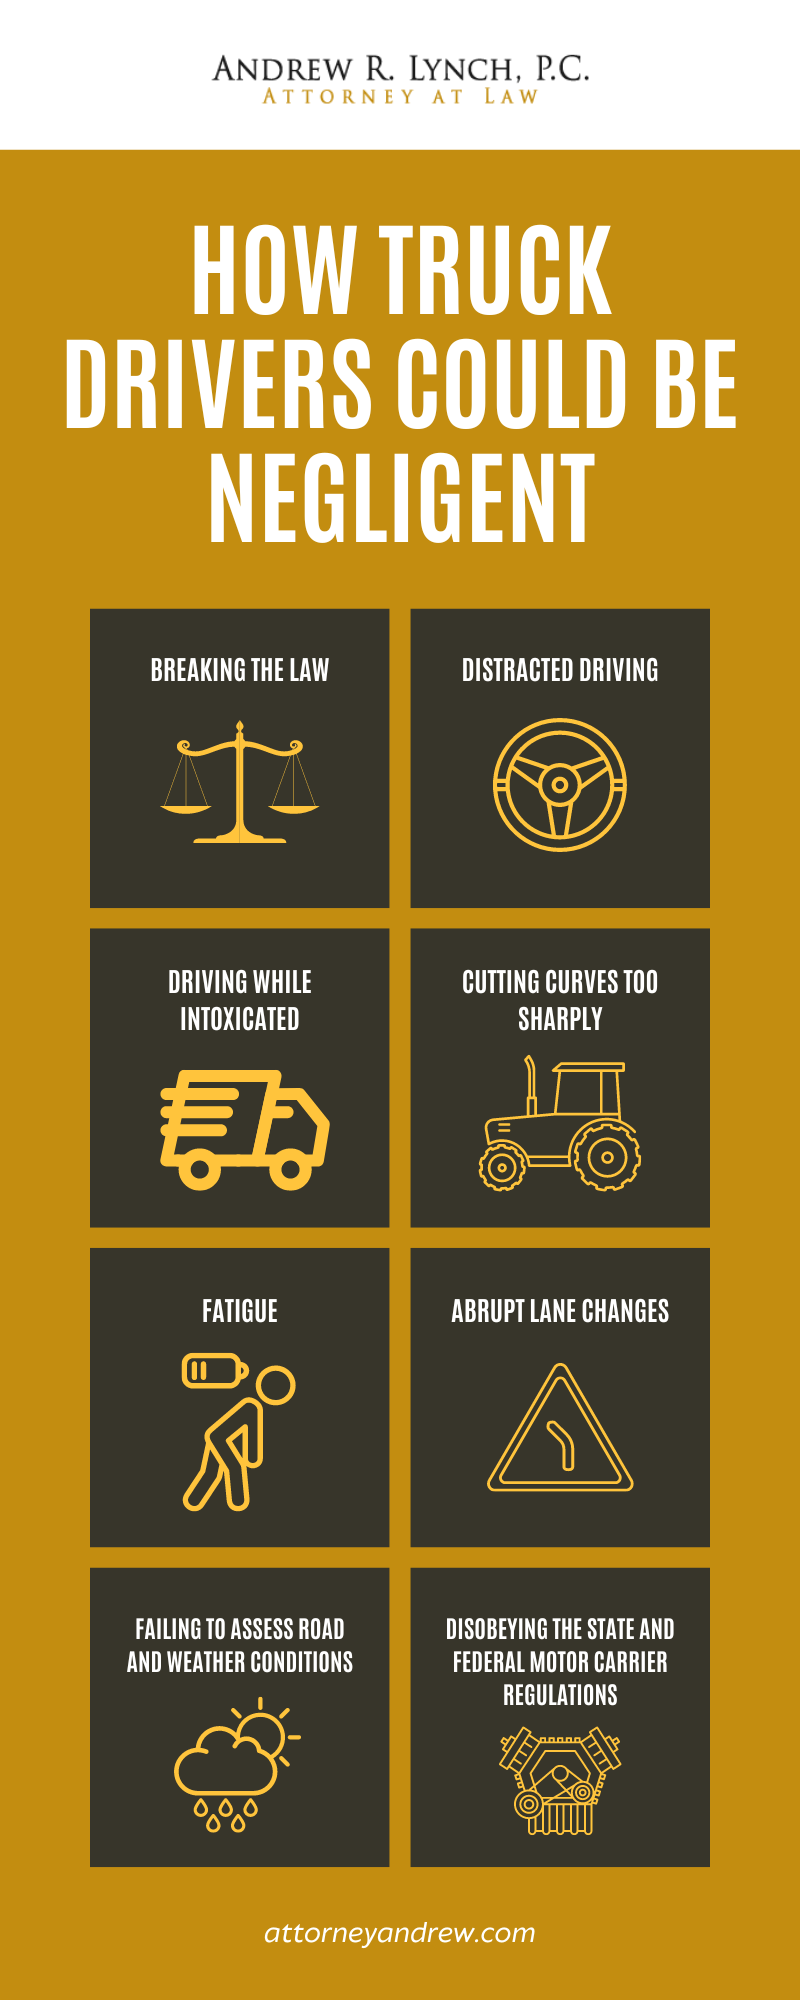 How Truck Drivers Could Be Negligent Infographic